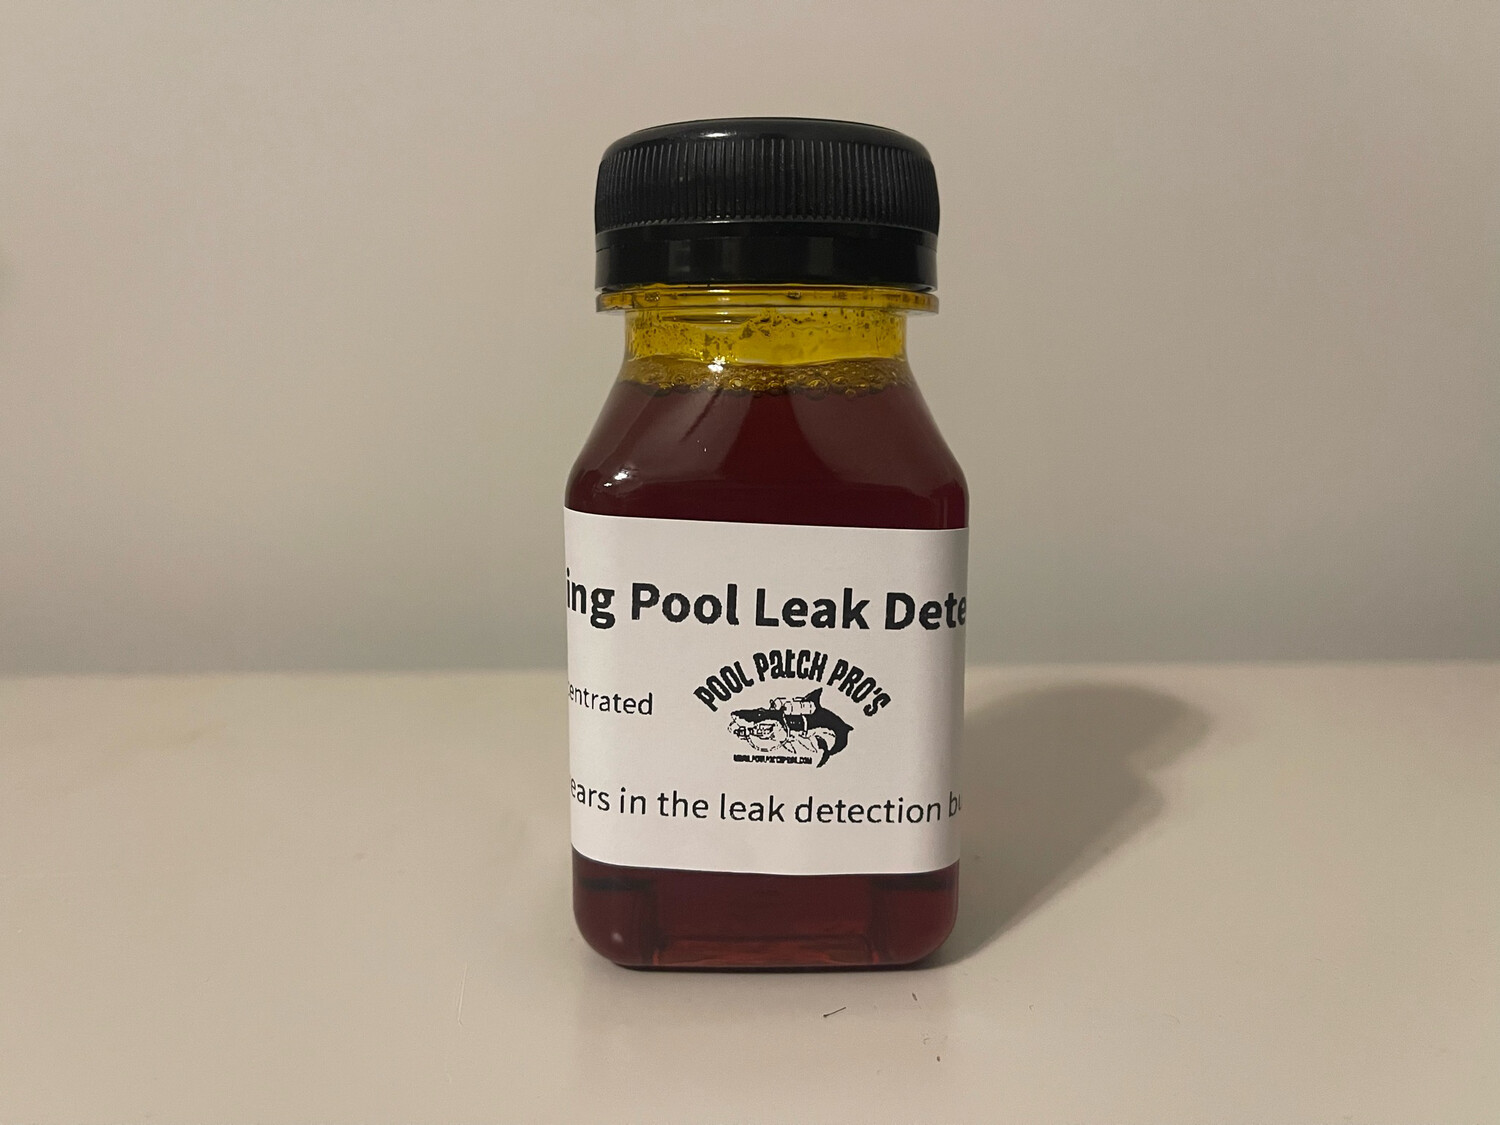 Concentrated Green Swimming Pool Leak Detection Dye 4oz